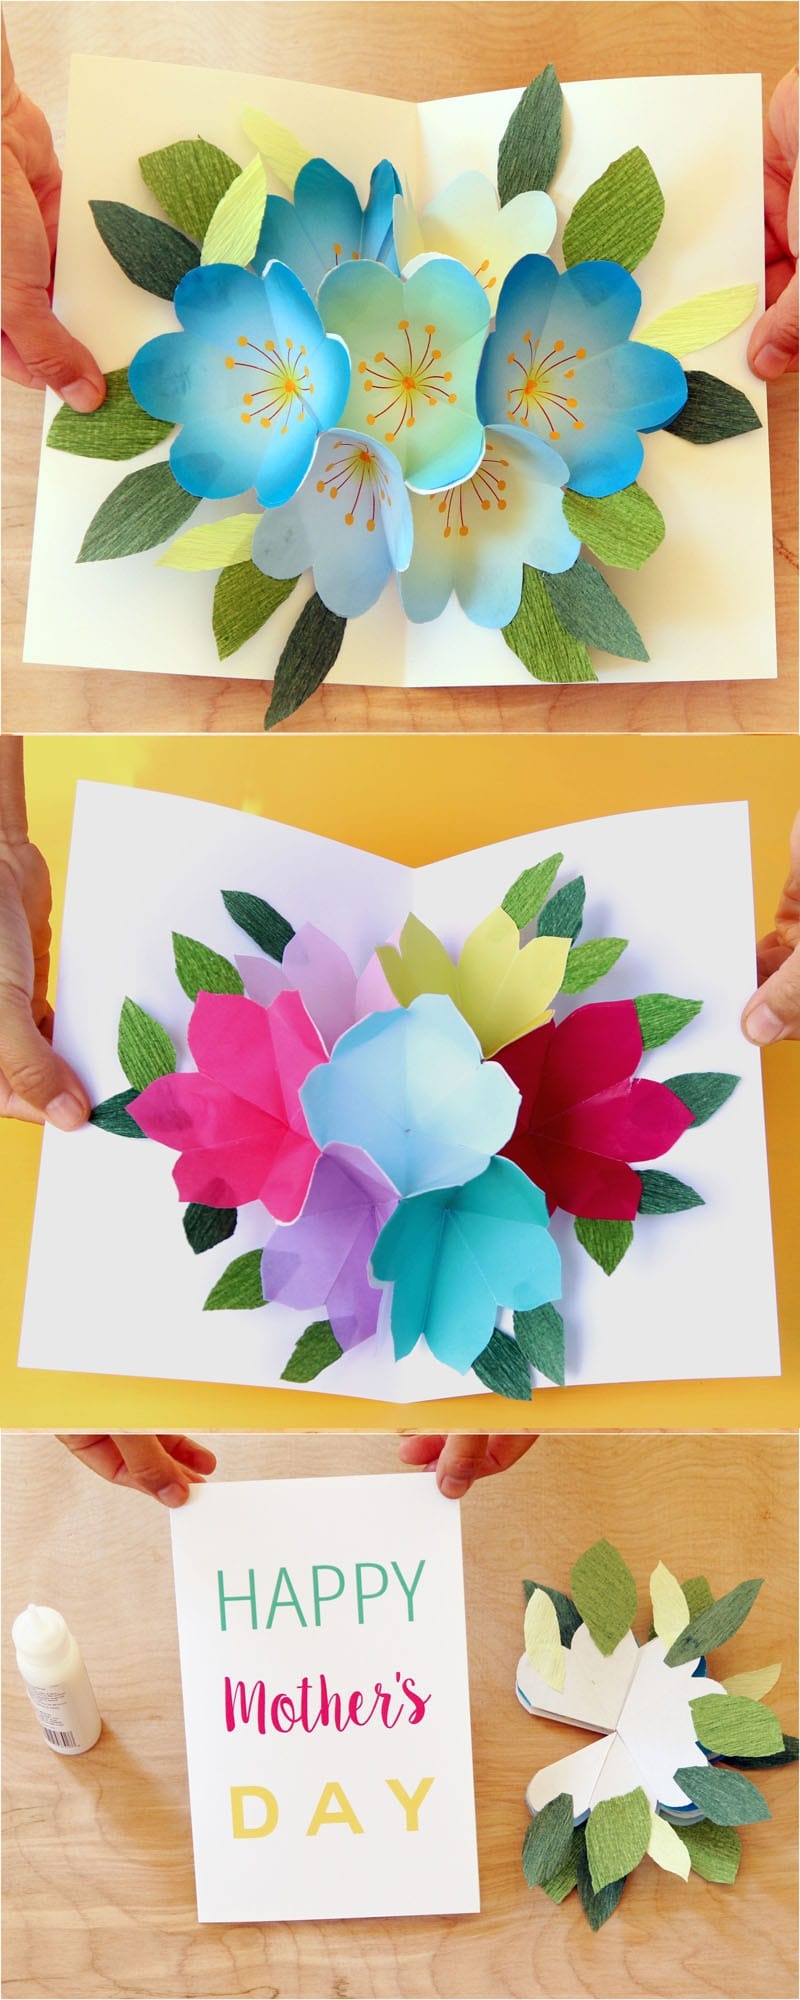 Pop Up Flowers Diy Printable Mother&amp;#039;s Day Card - A Piece Of Rainbow - Free Printable Cards No Download Required